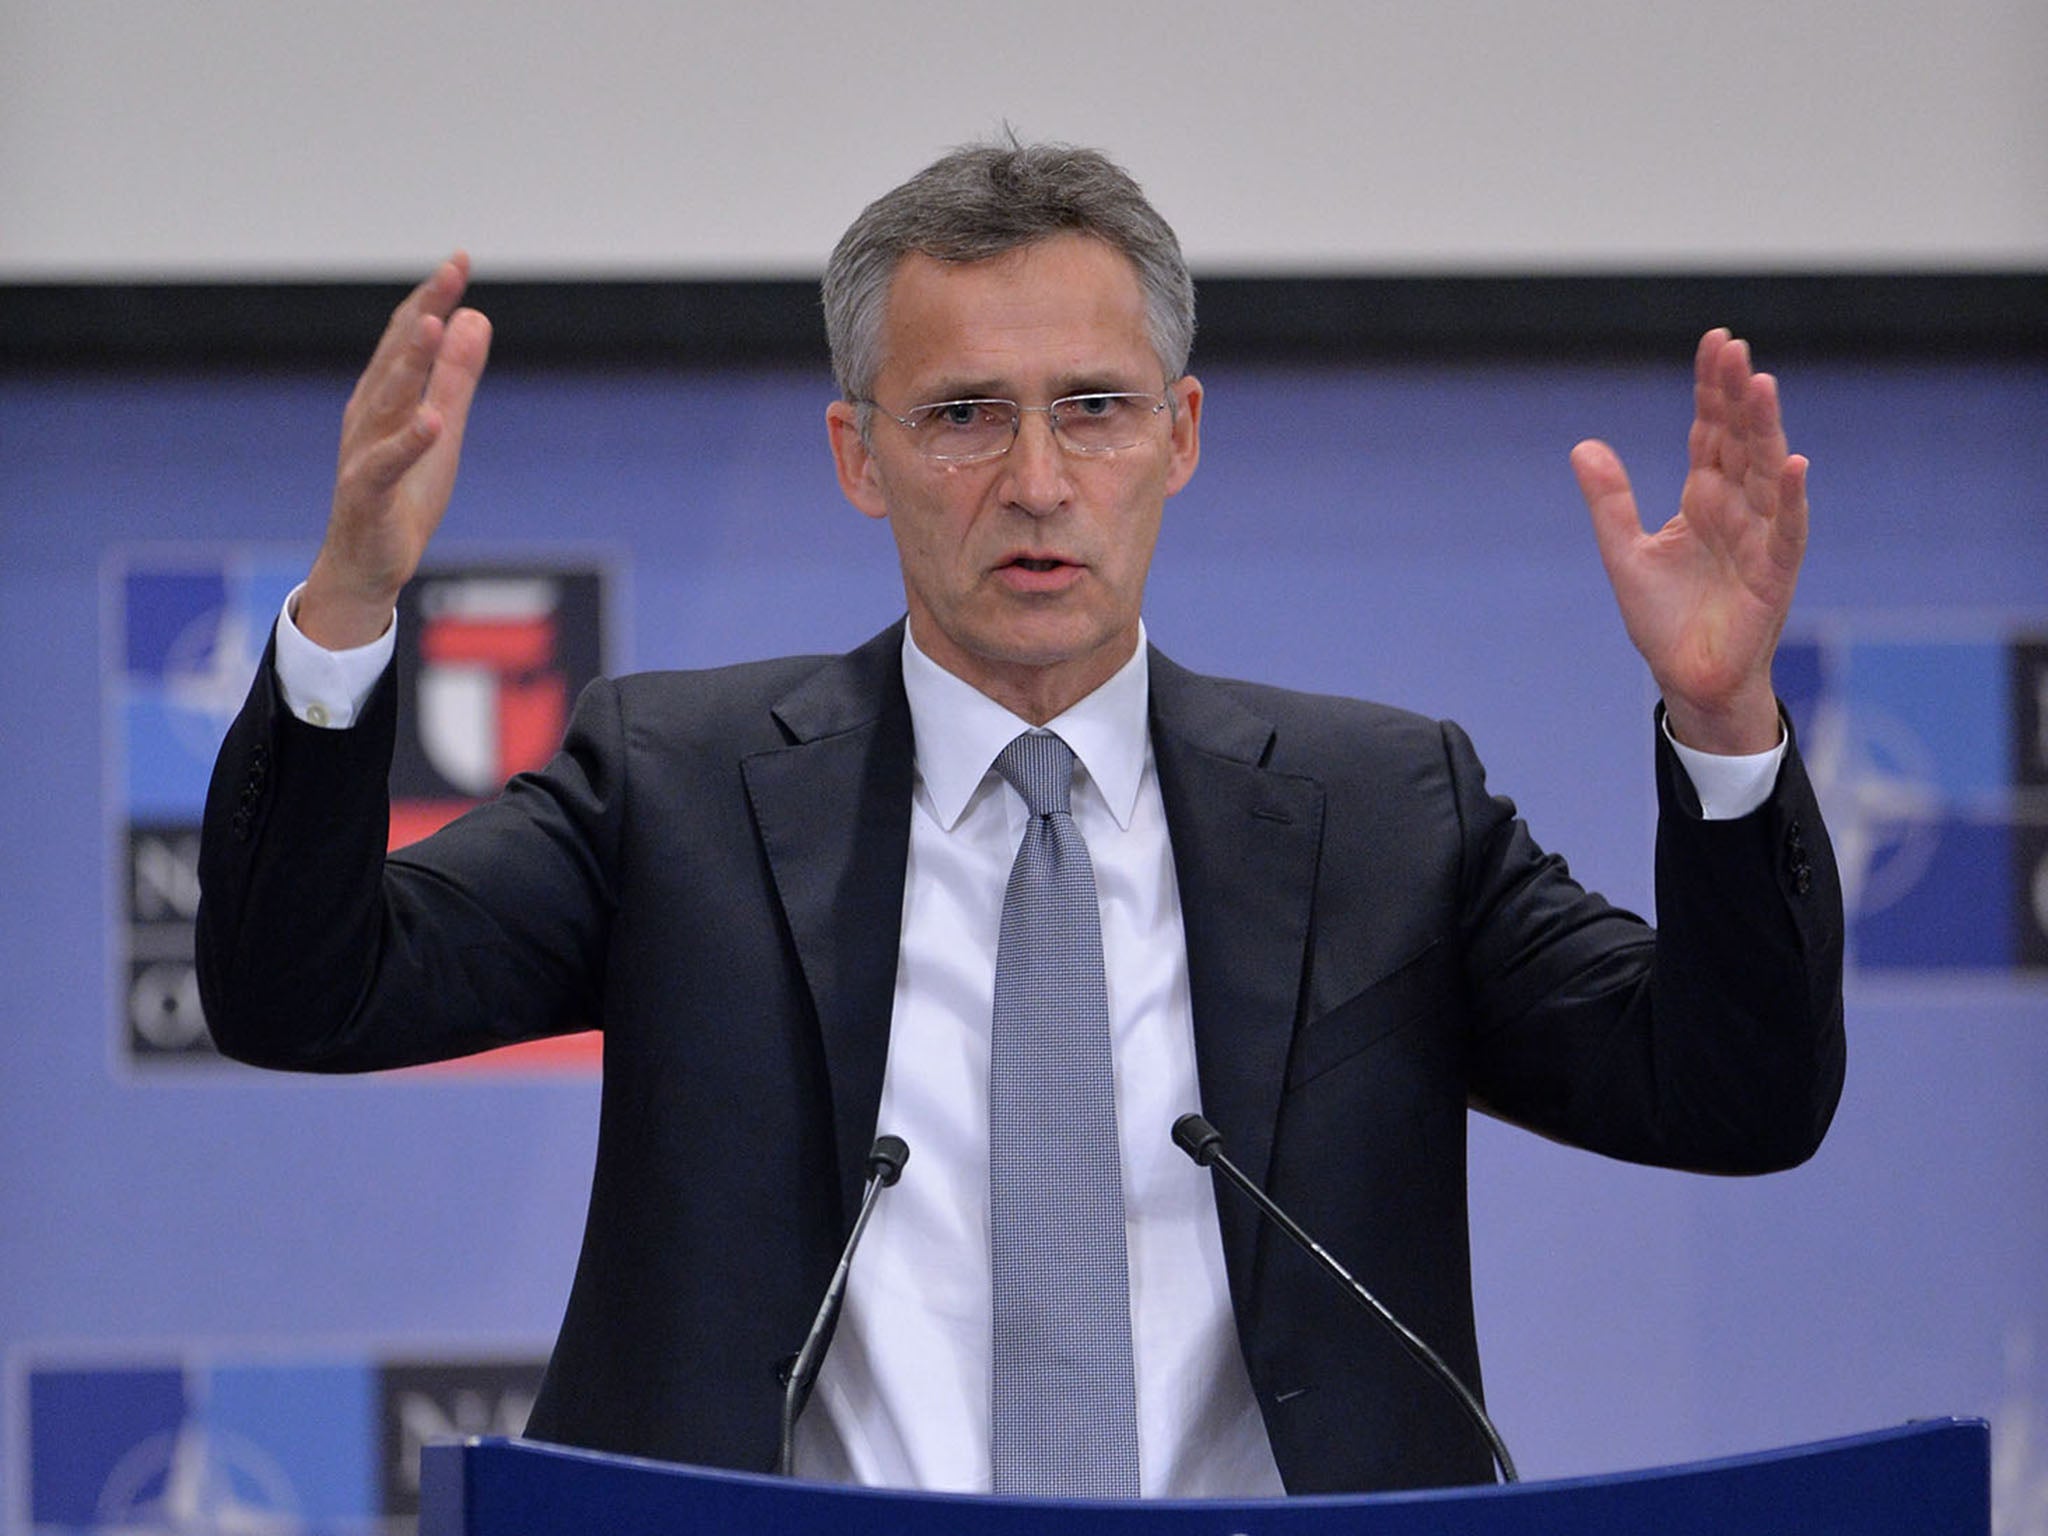 Jens Stoltenberg speaking at a press conference in Brussels